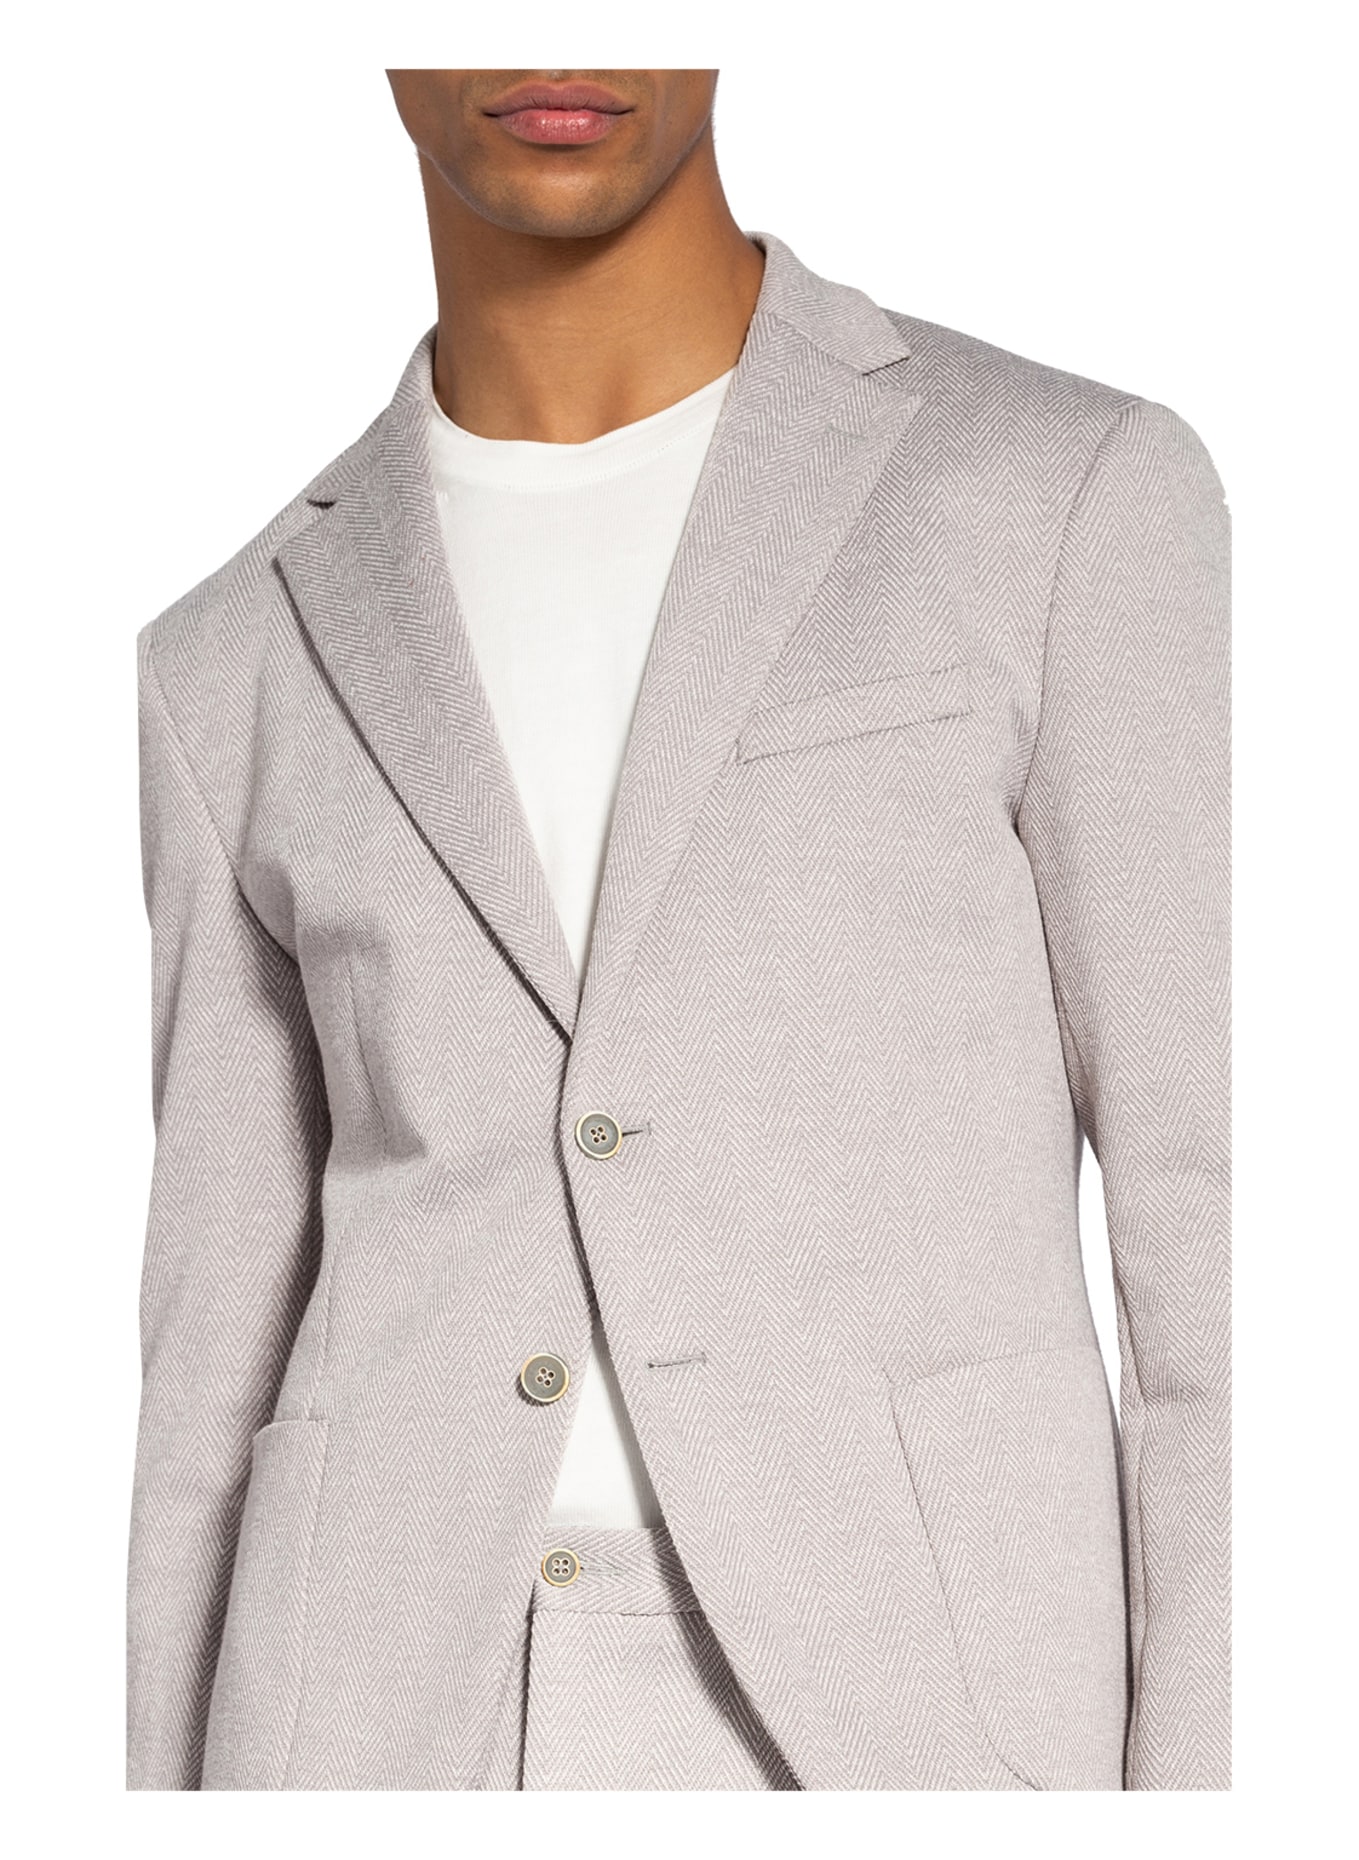 PAUL Suit jacket slim fit in jersey, Color: WHITE/ LIGHT GRAY (Image 4)